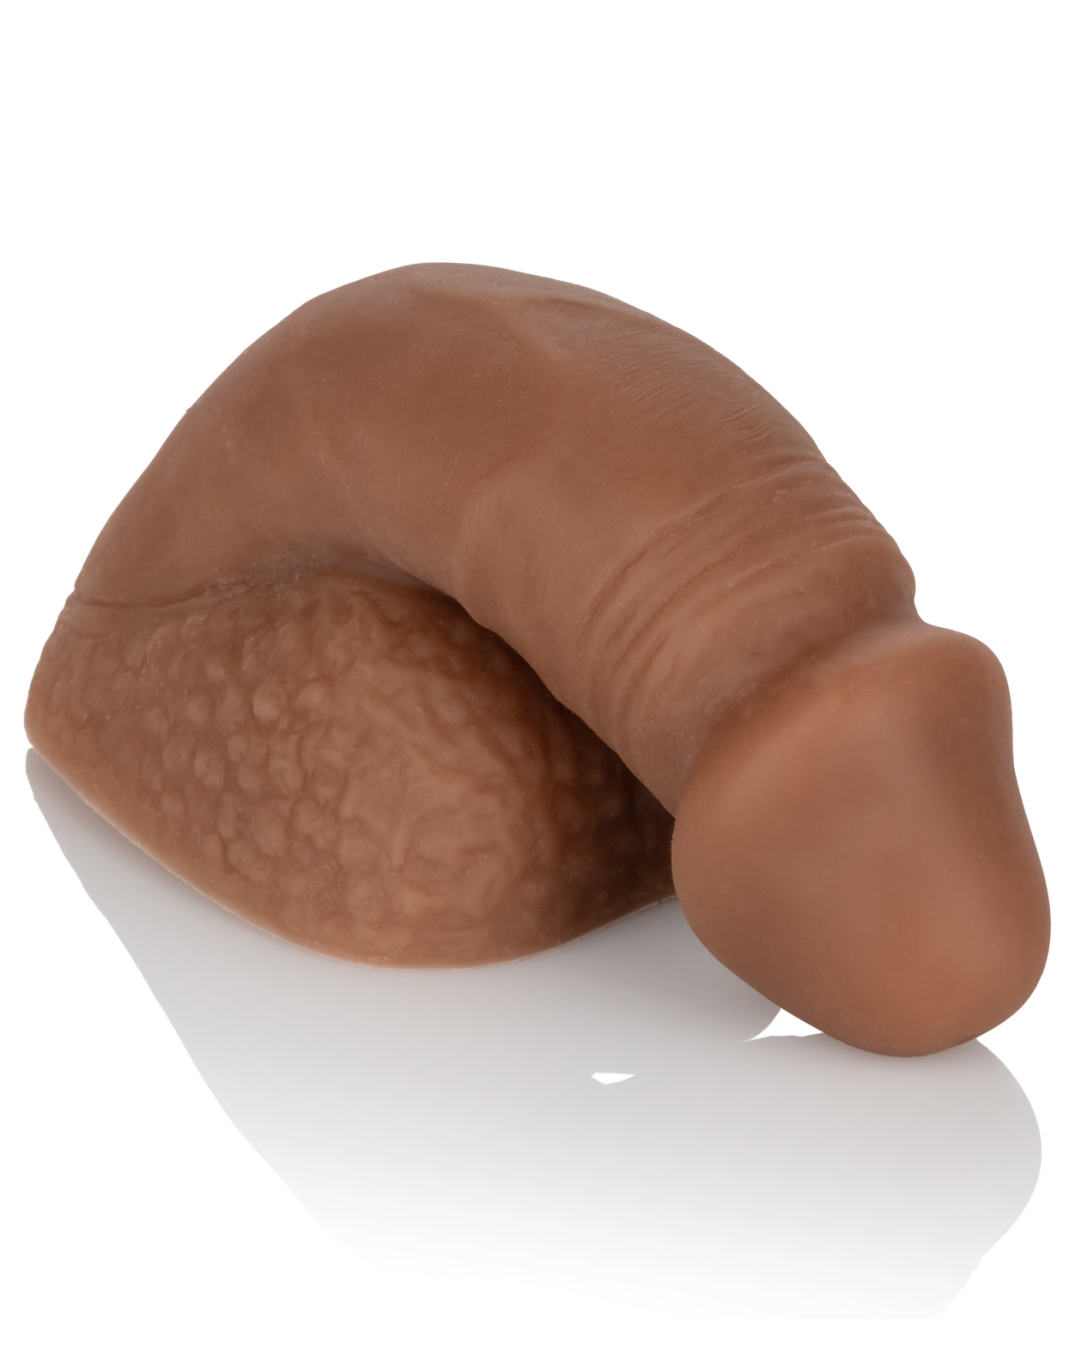 Packer Gear Silicone Packing Penis 4 Inch - Mocha